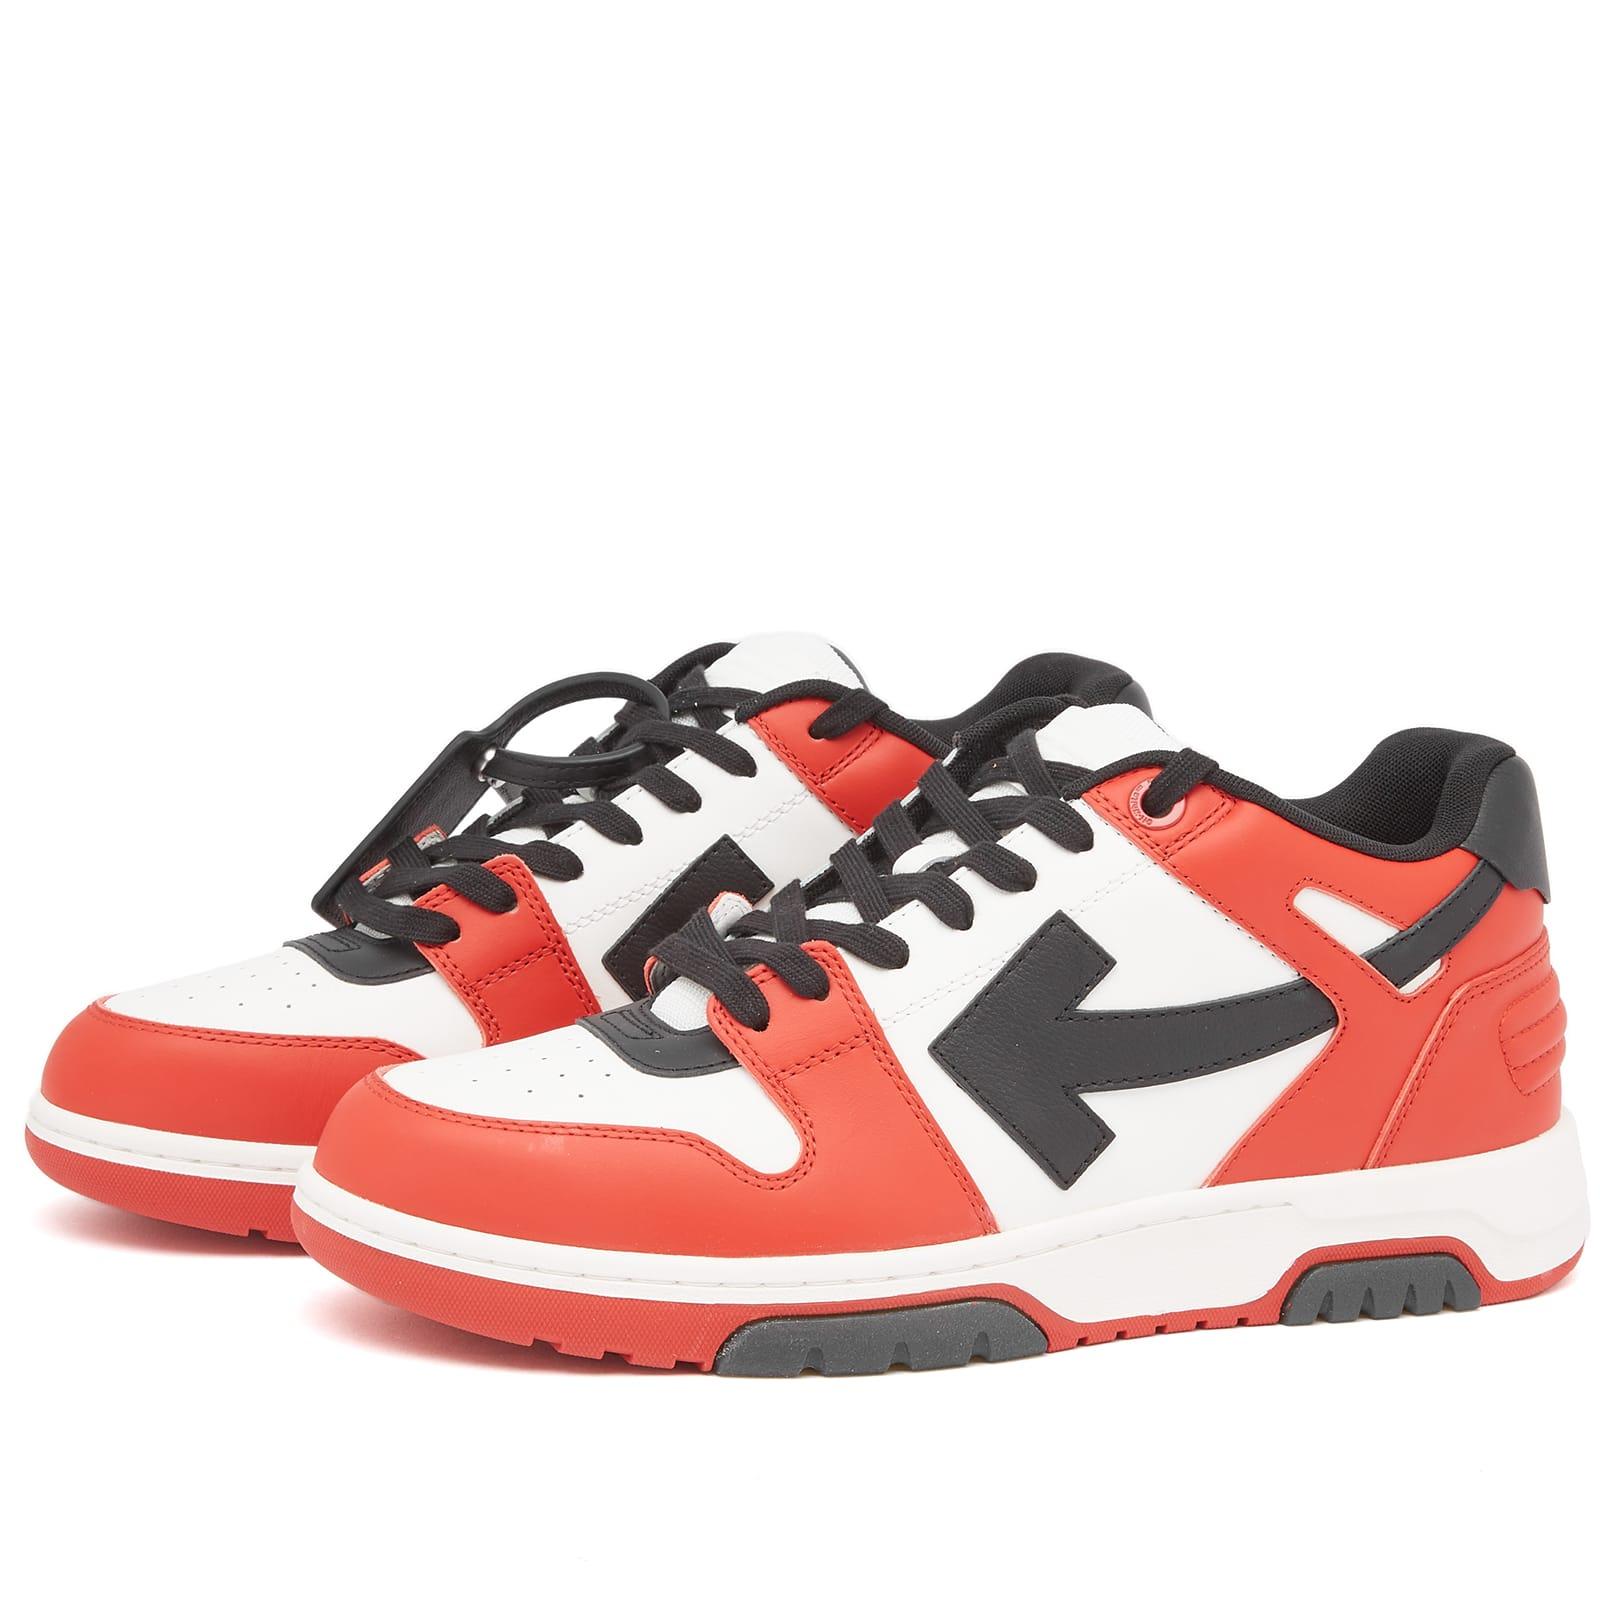 Off-White c/o Virgil Abloh 'out Of Office' Sneakers in Red for Men